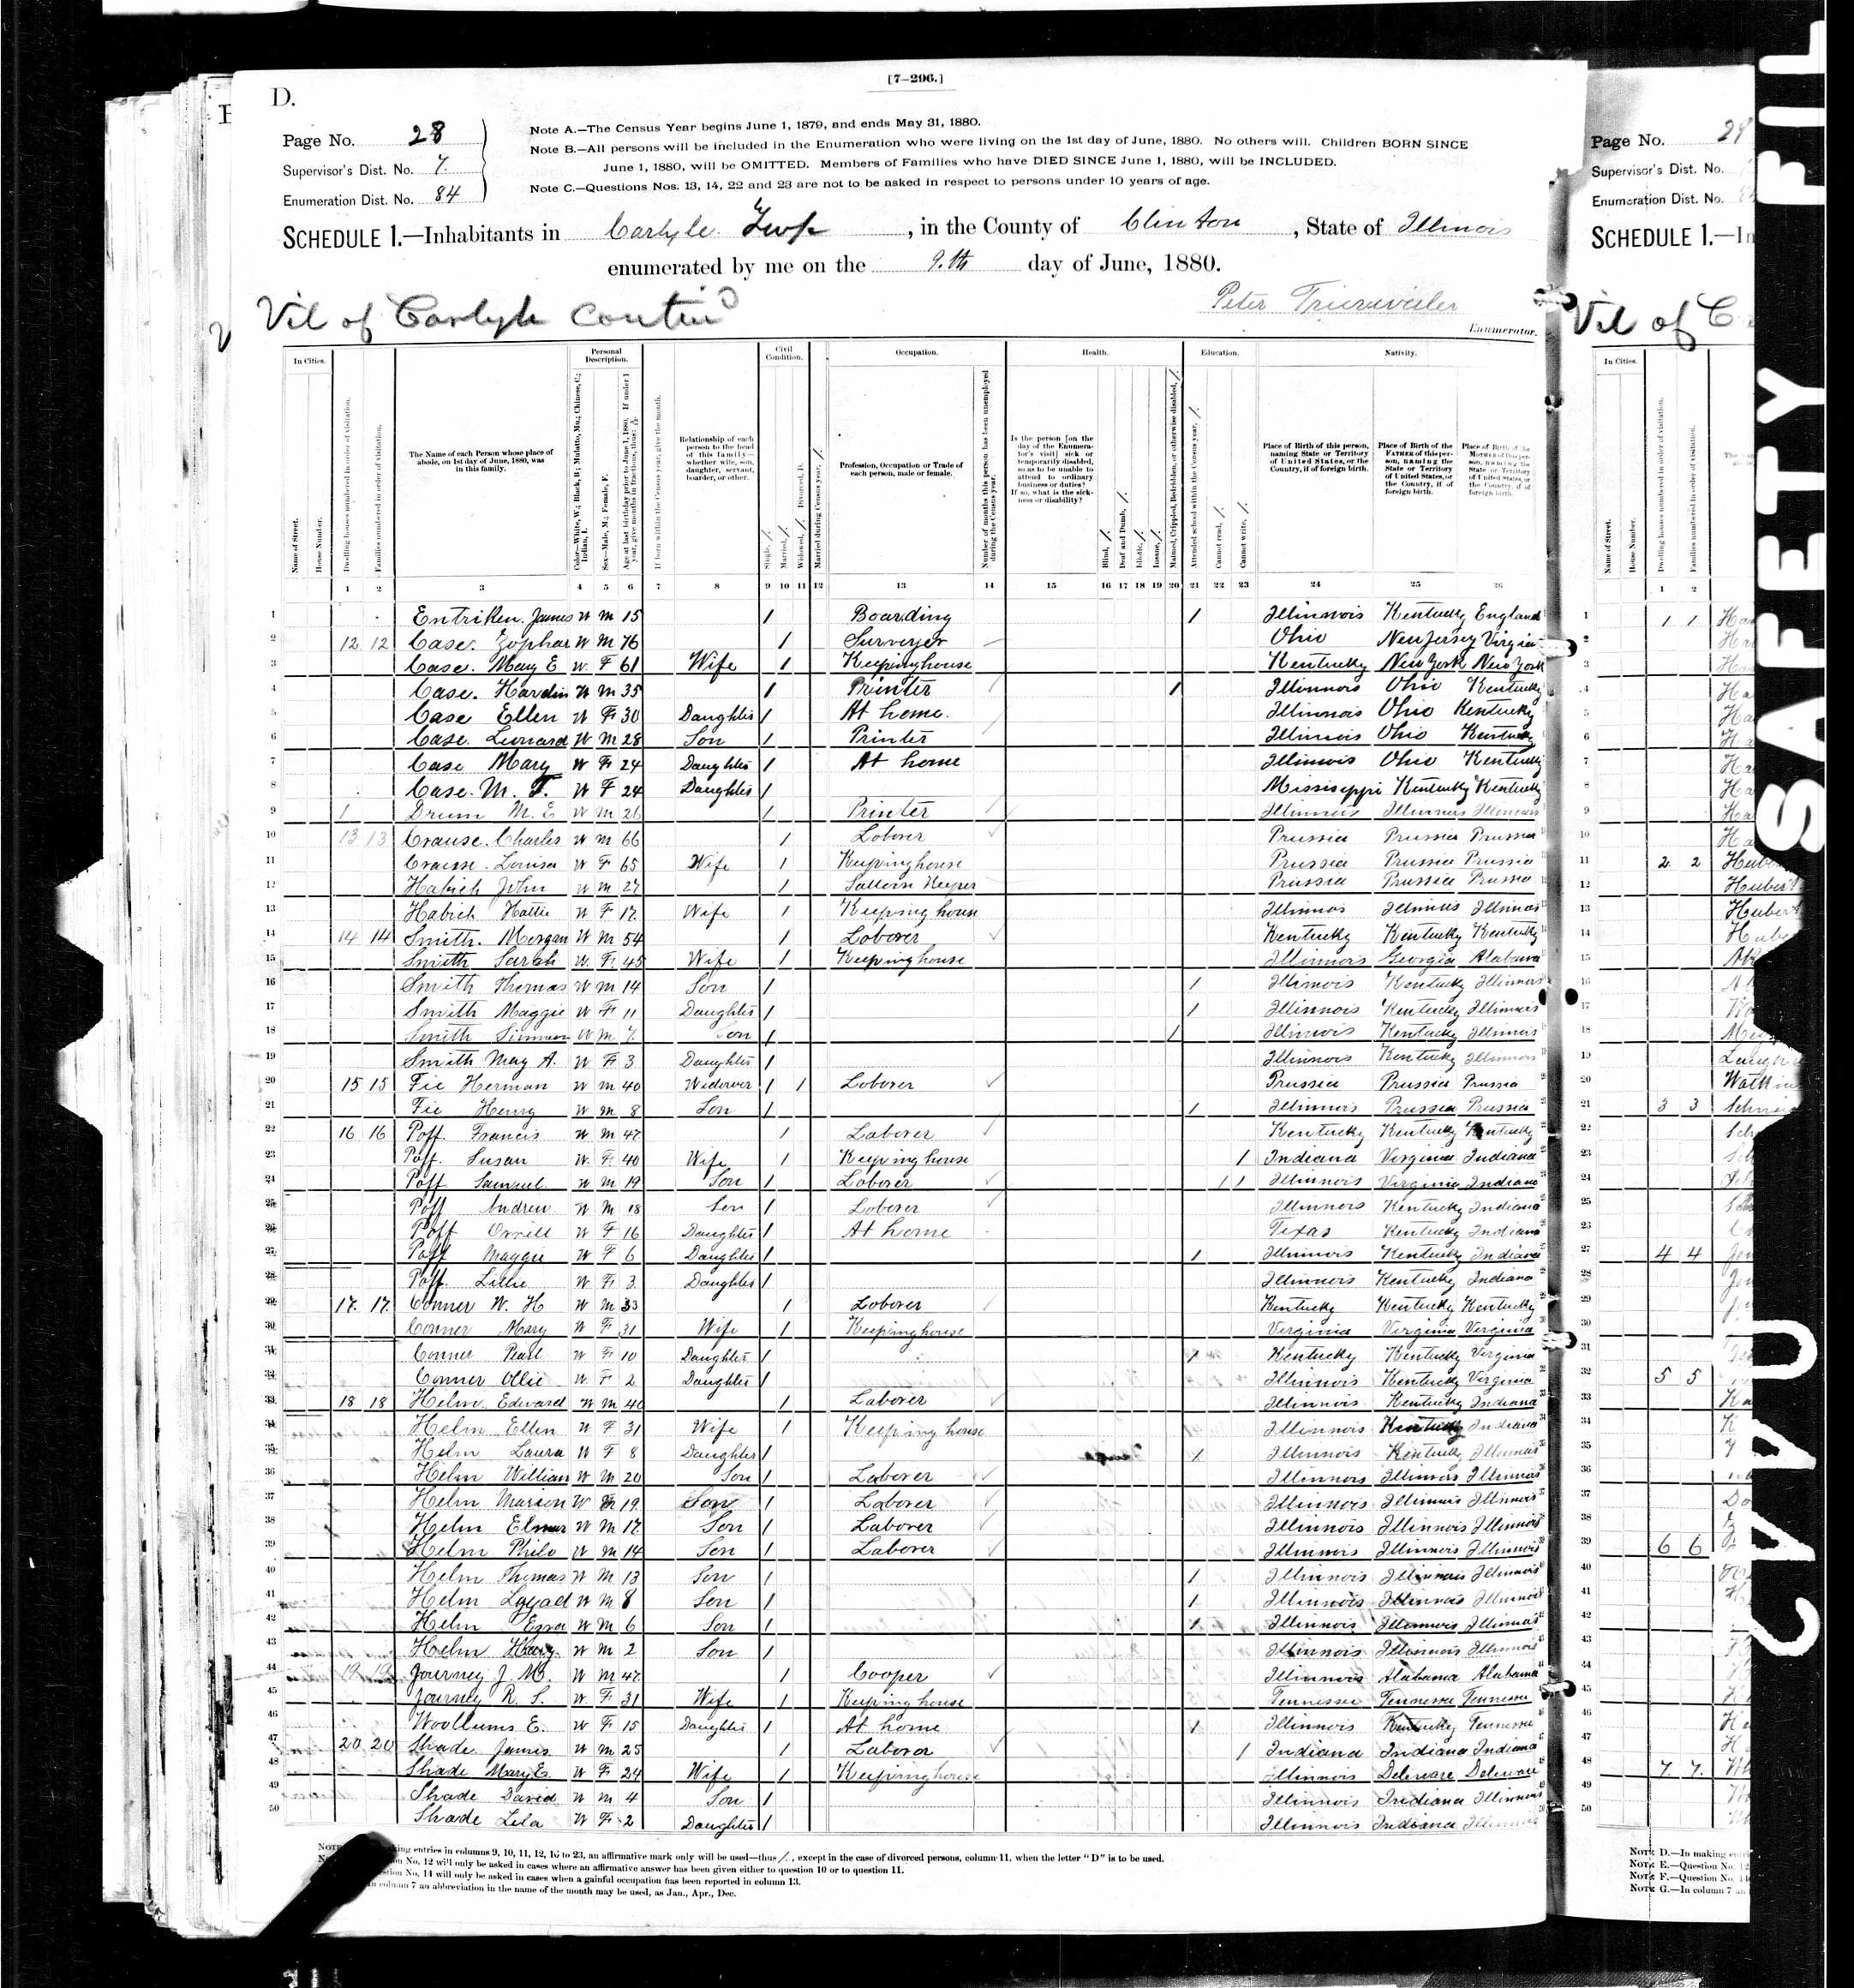 John M. Journey and wife Ritha S. (Walker) Woollums Journey, 1880 Clinton County, Illinois, census